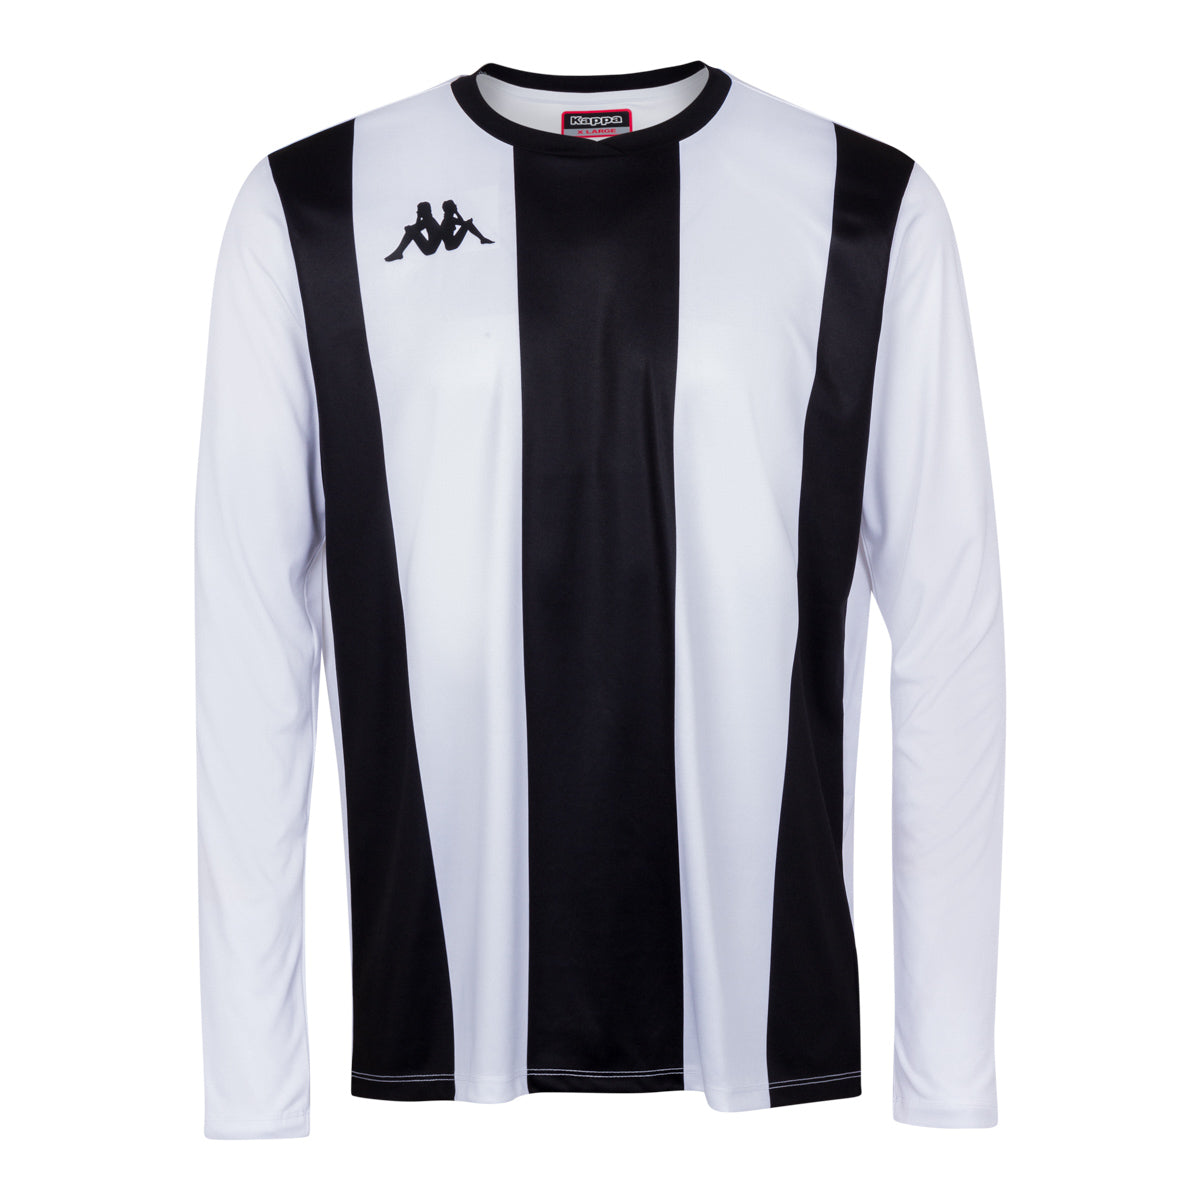 Maillot Football Caserne Blanc Homme - Image 1